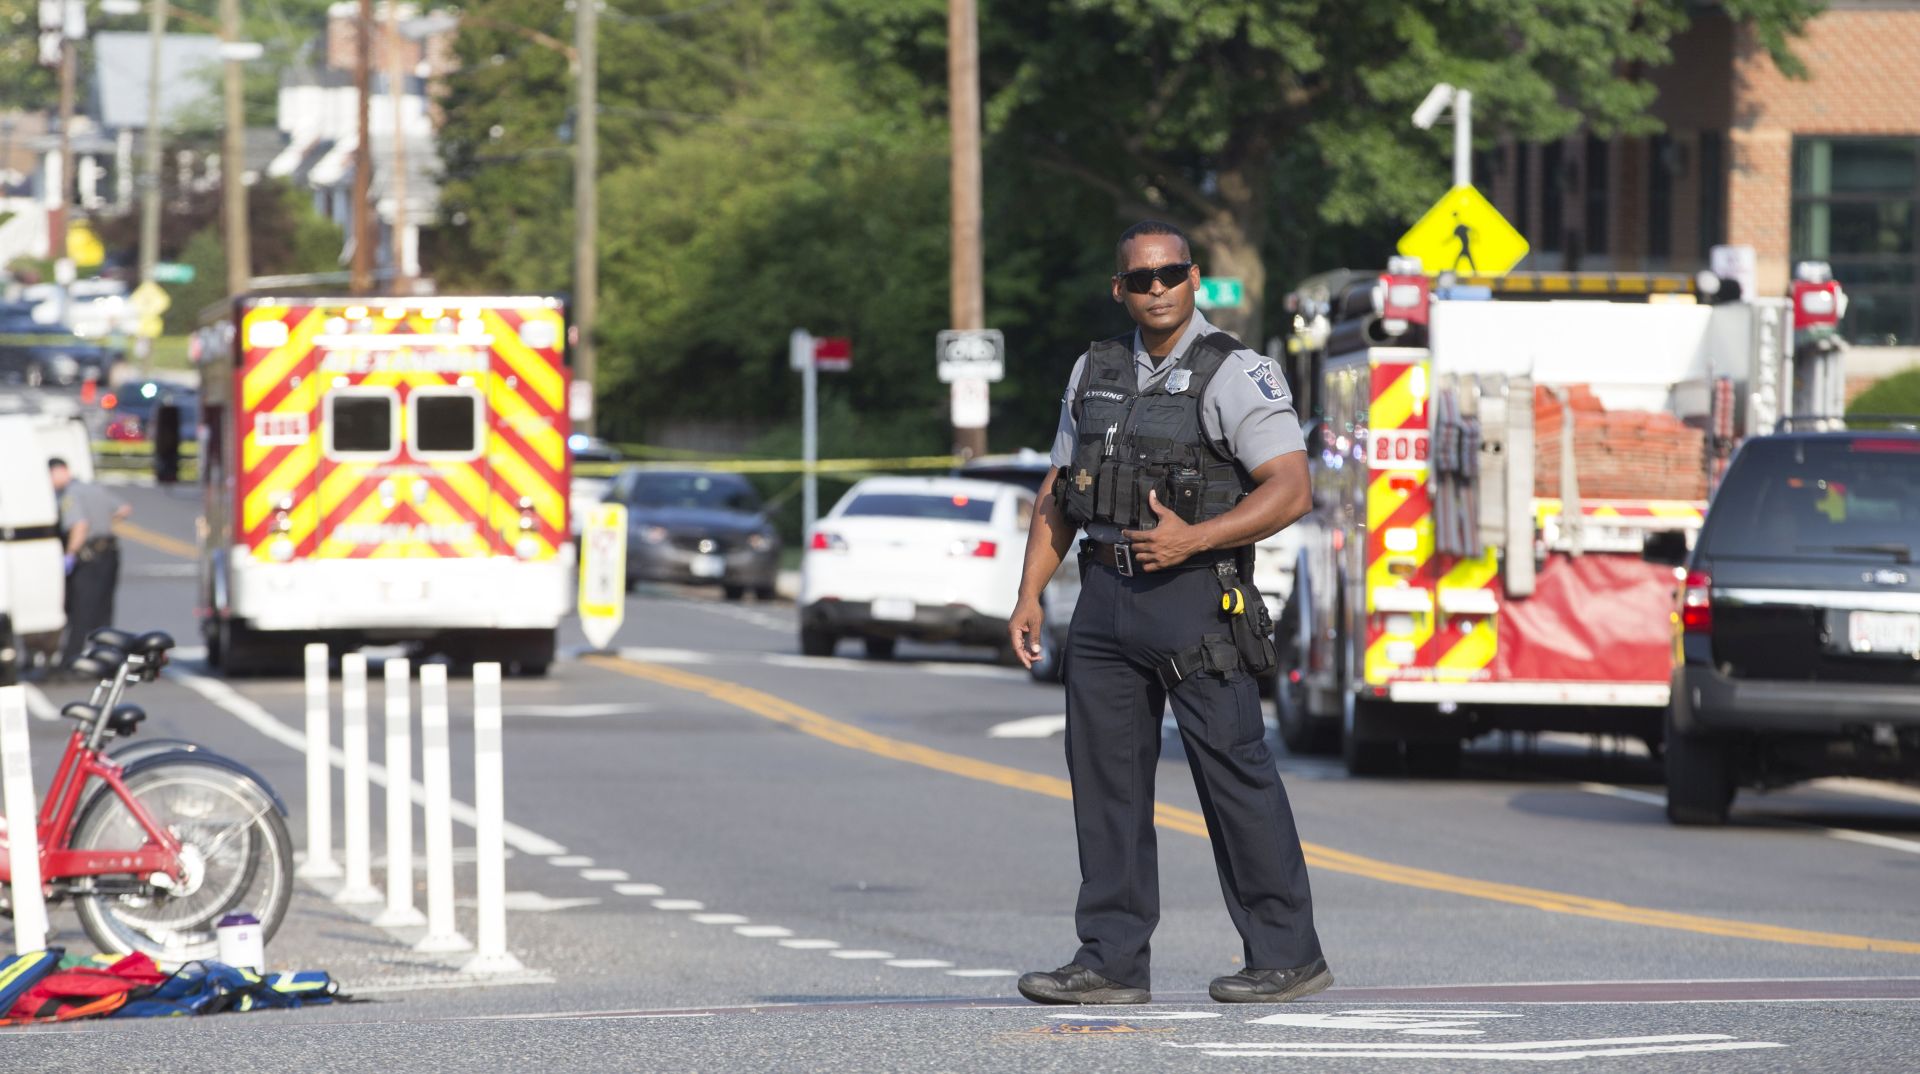 epa06027752 Police close a street near the scene of a shooting in Alexandria, Virginia, USA, 14 June 2017. Republican Representative Steve Scalise and two Capitol police officers have been shot shot at a congressional baseball game practice session, according to media reports.  EPA/MICHAEL REYNOLDS